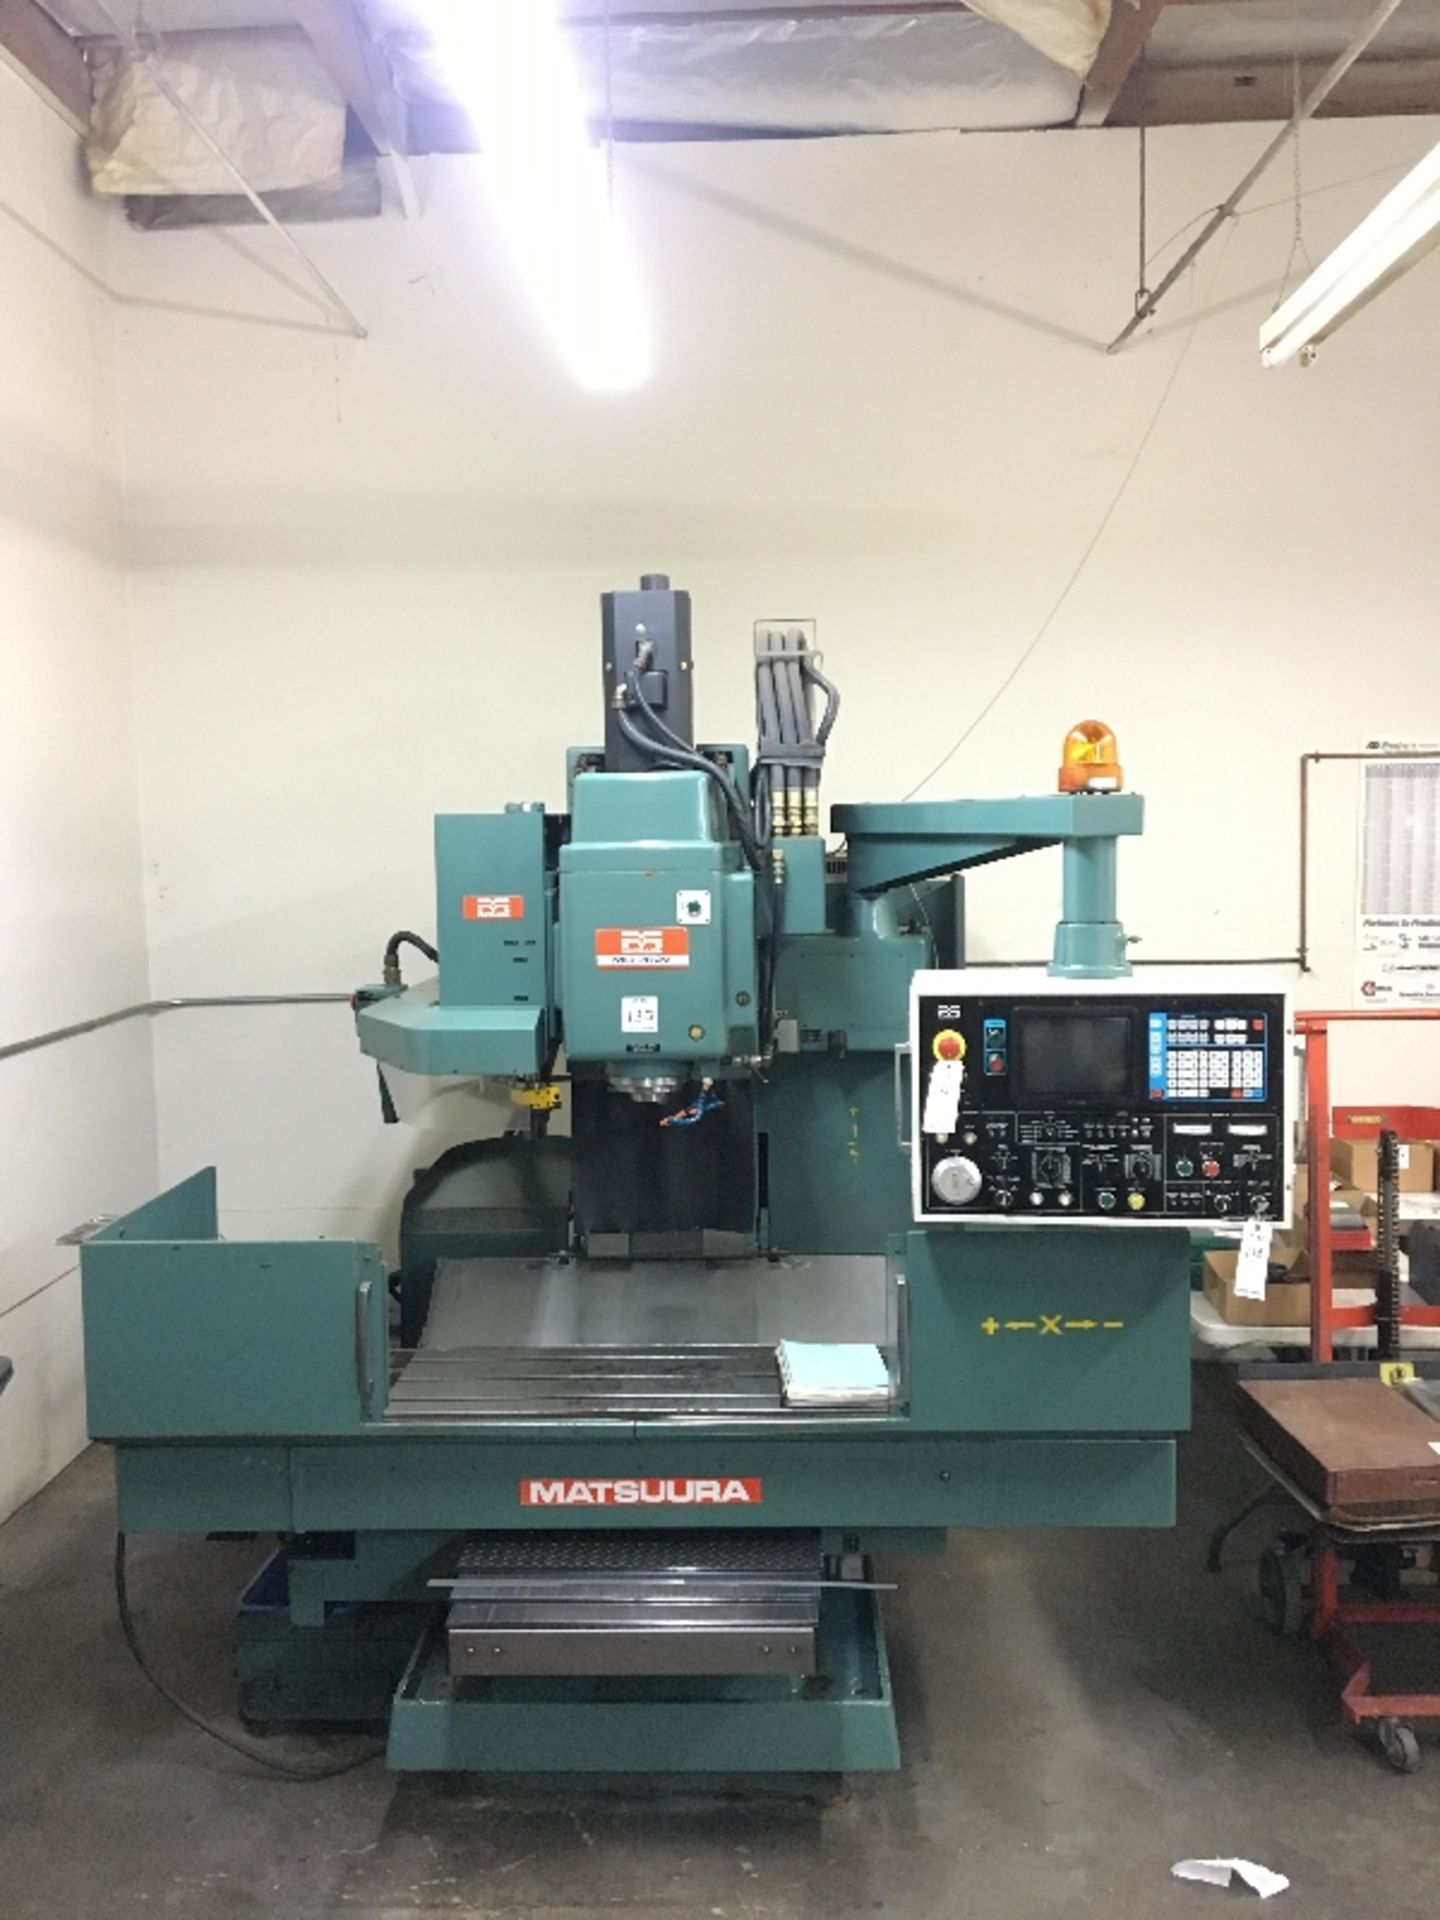 1982 MATSUURA MC-760V- 25-4,500 RPM, 40 TAPERED TOOL SPINDLE, SPINDLE SPEED, YASNAC CONTROLS, 16''